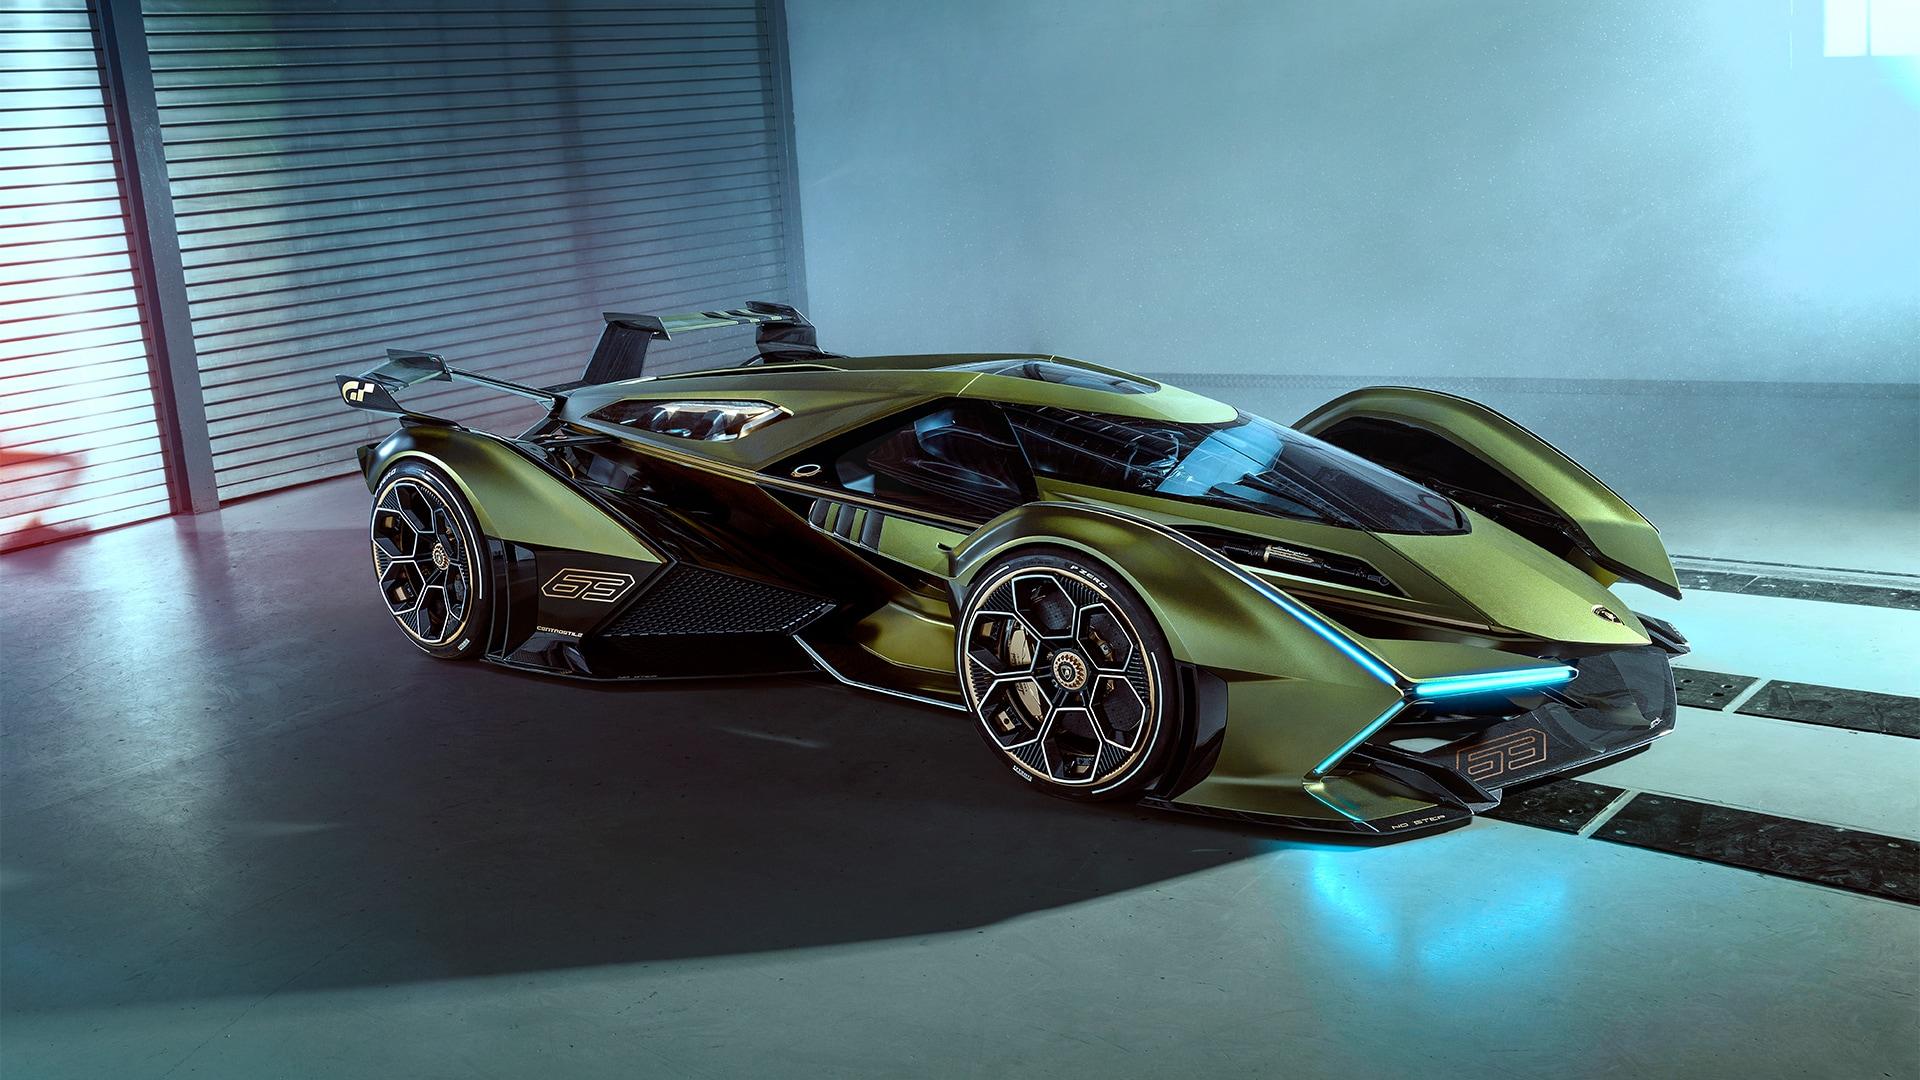 Lambo V12 Vision Gran Turismo: You Can Drive It, Too